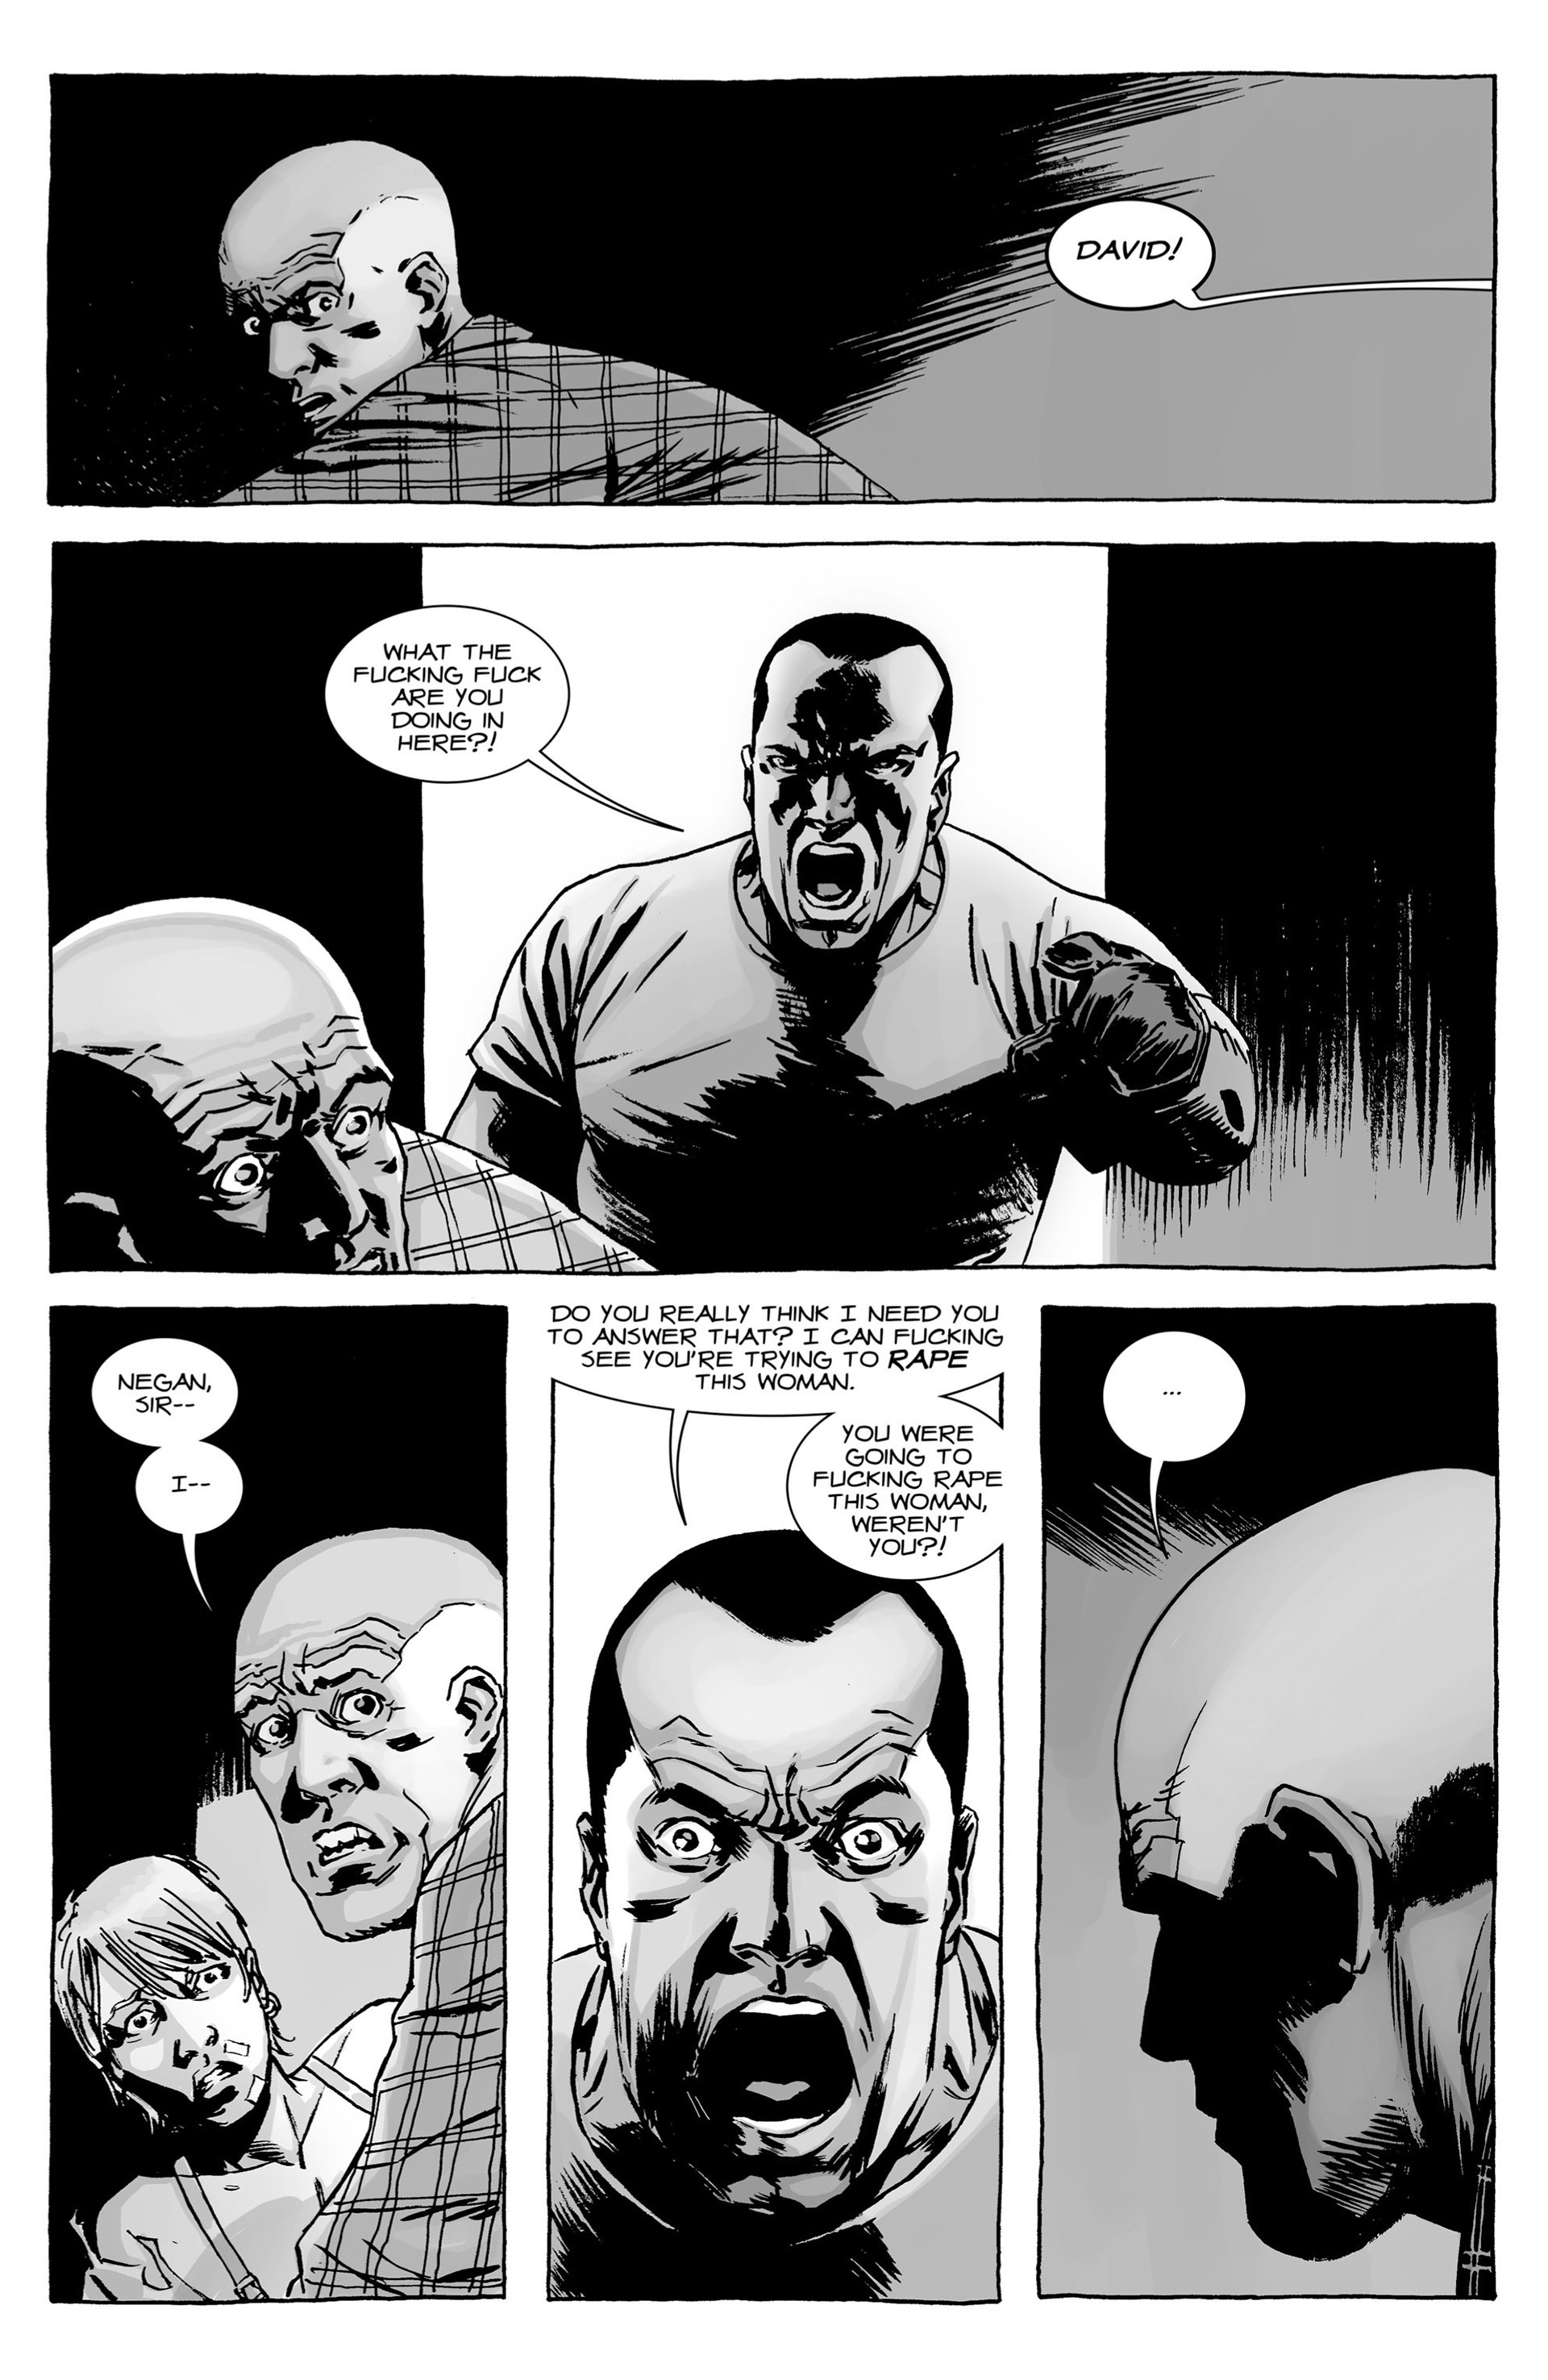 scans_daily The Walking Dead #117